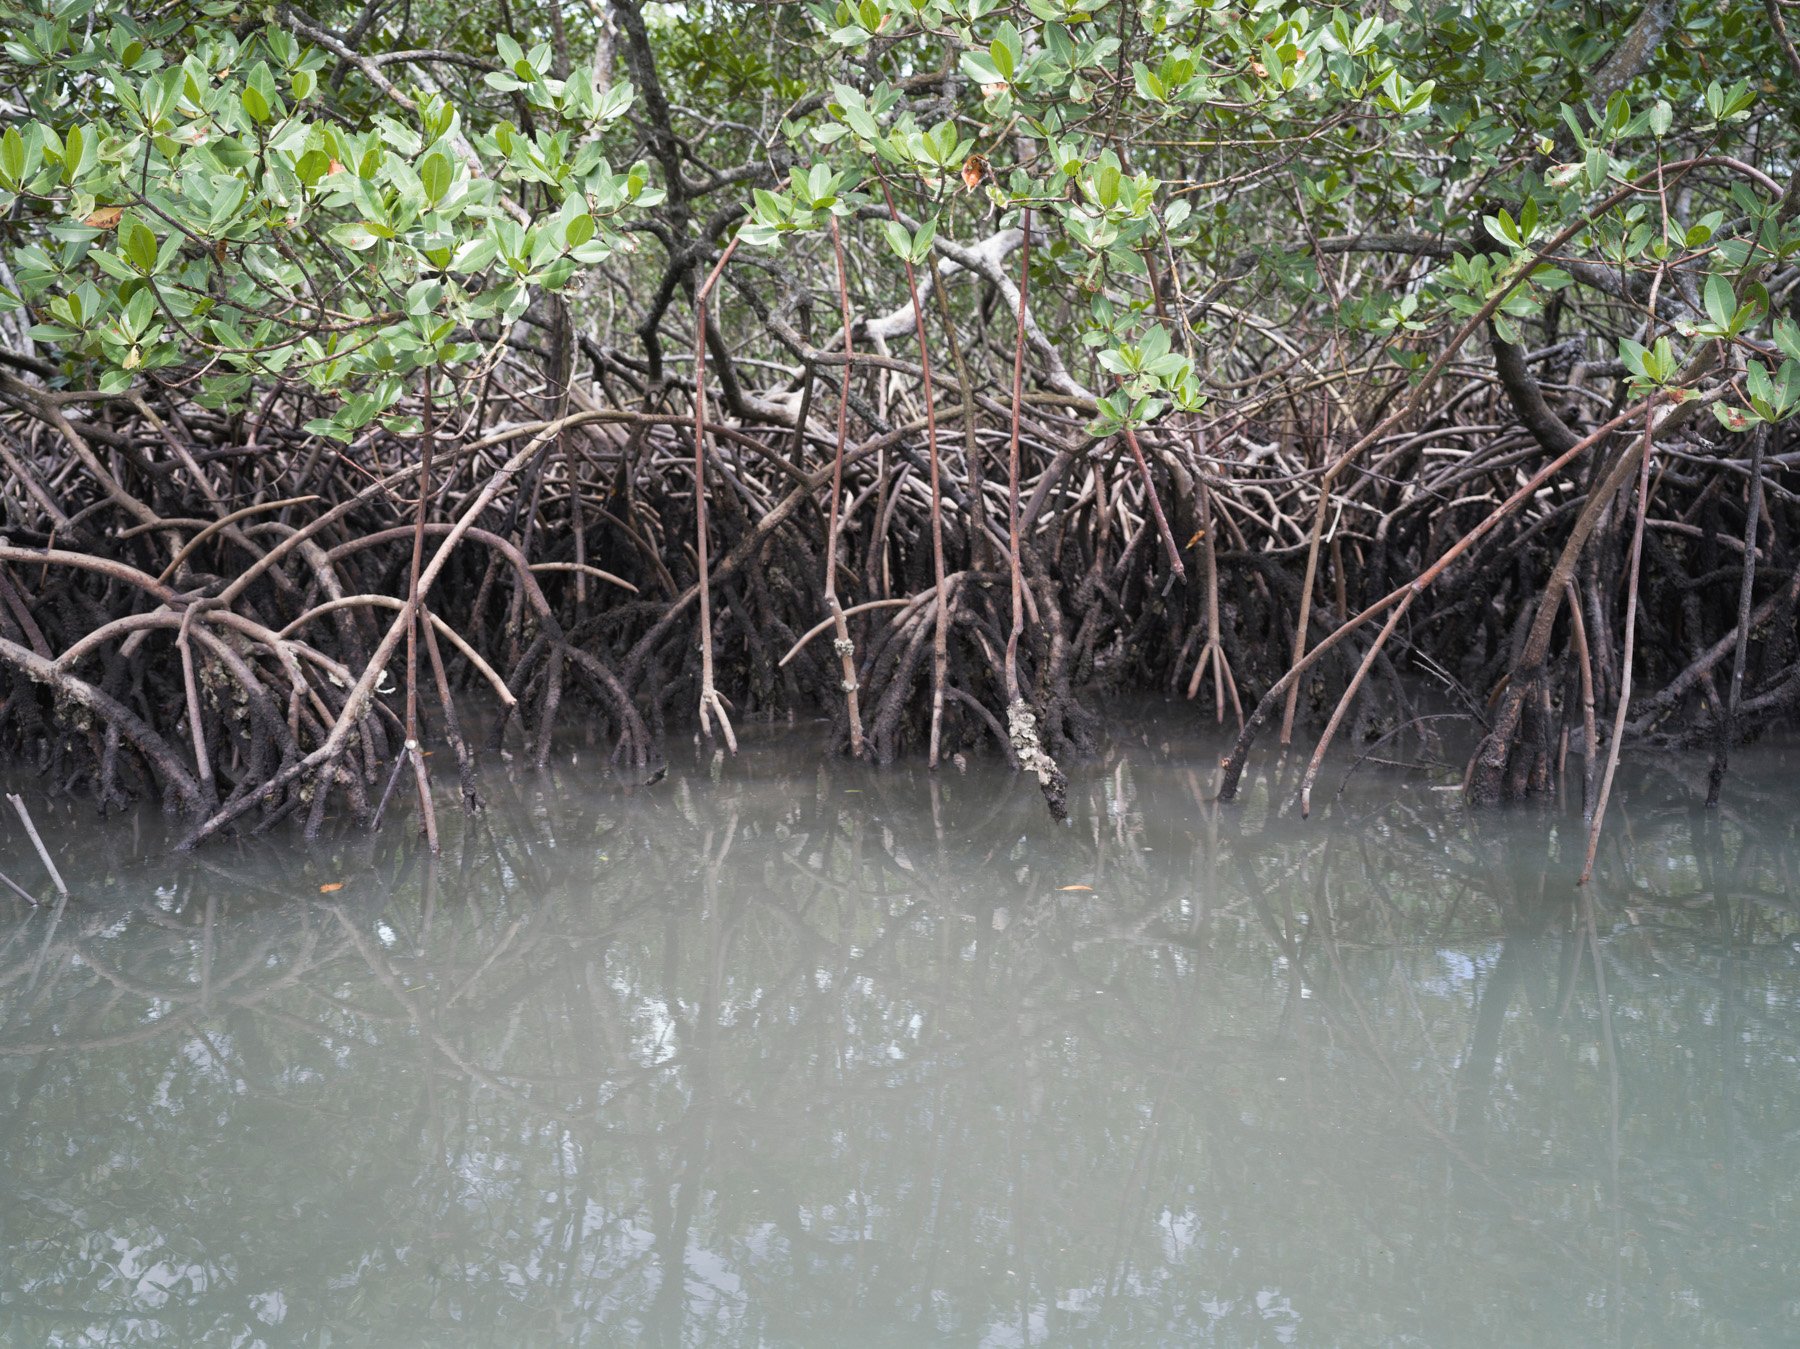  Ilha de Maré, Bahia, 2021. A view of the mangrove field surrounding the island. Mangrove are essential for the economy of the local communities that live of shellfish hunting in this natural habitat. The industrialisation of the area caused a pollut